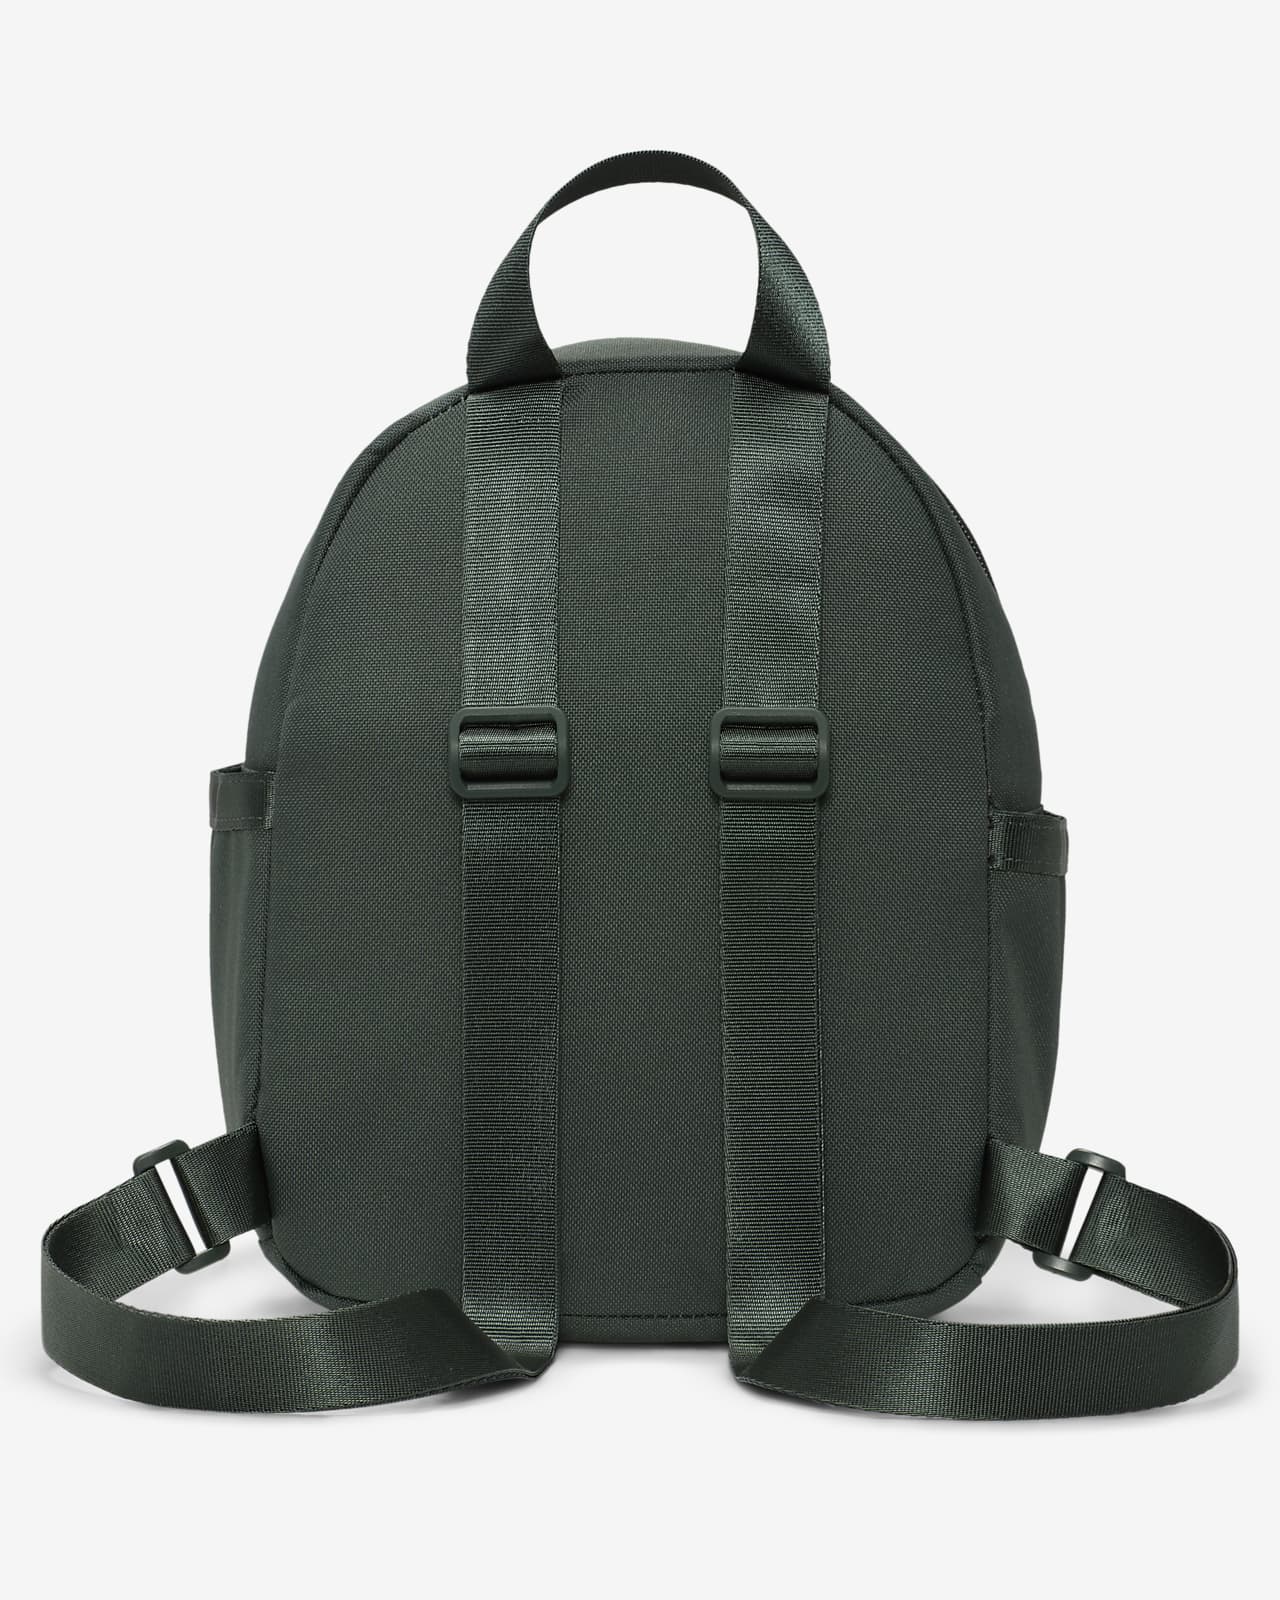 Ladies Backpack | Buy Backpacks for Women Online - Accessorize India